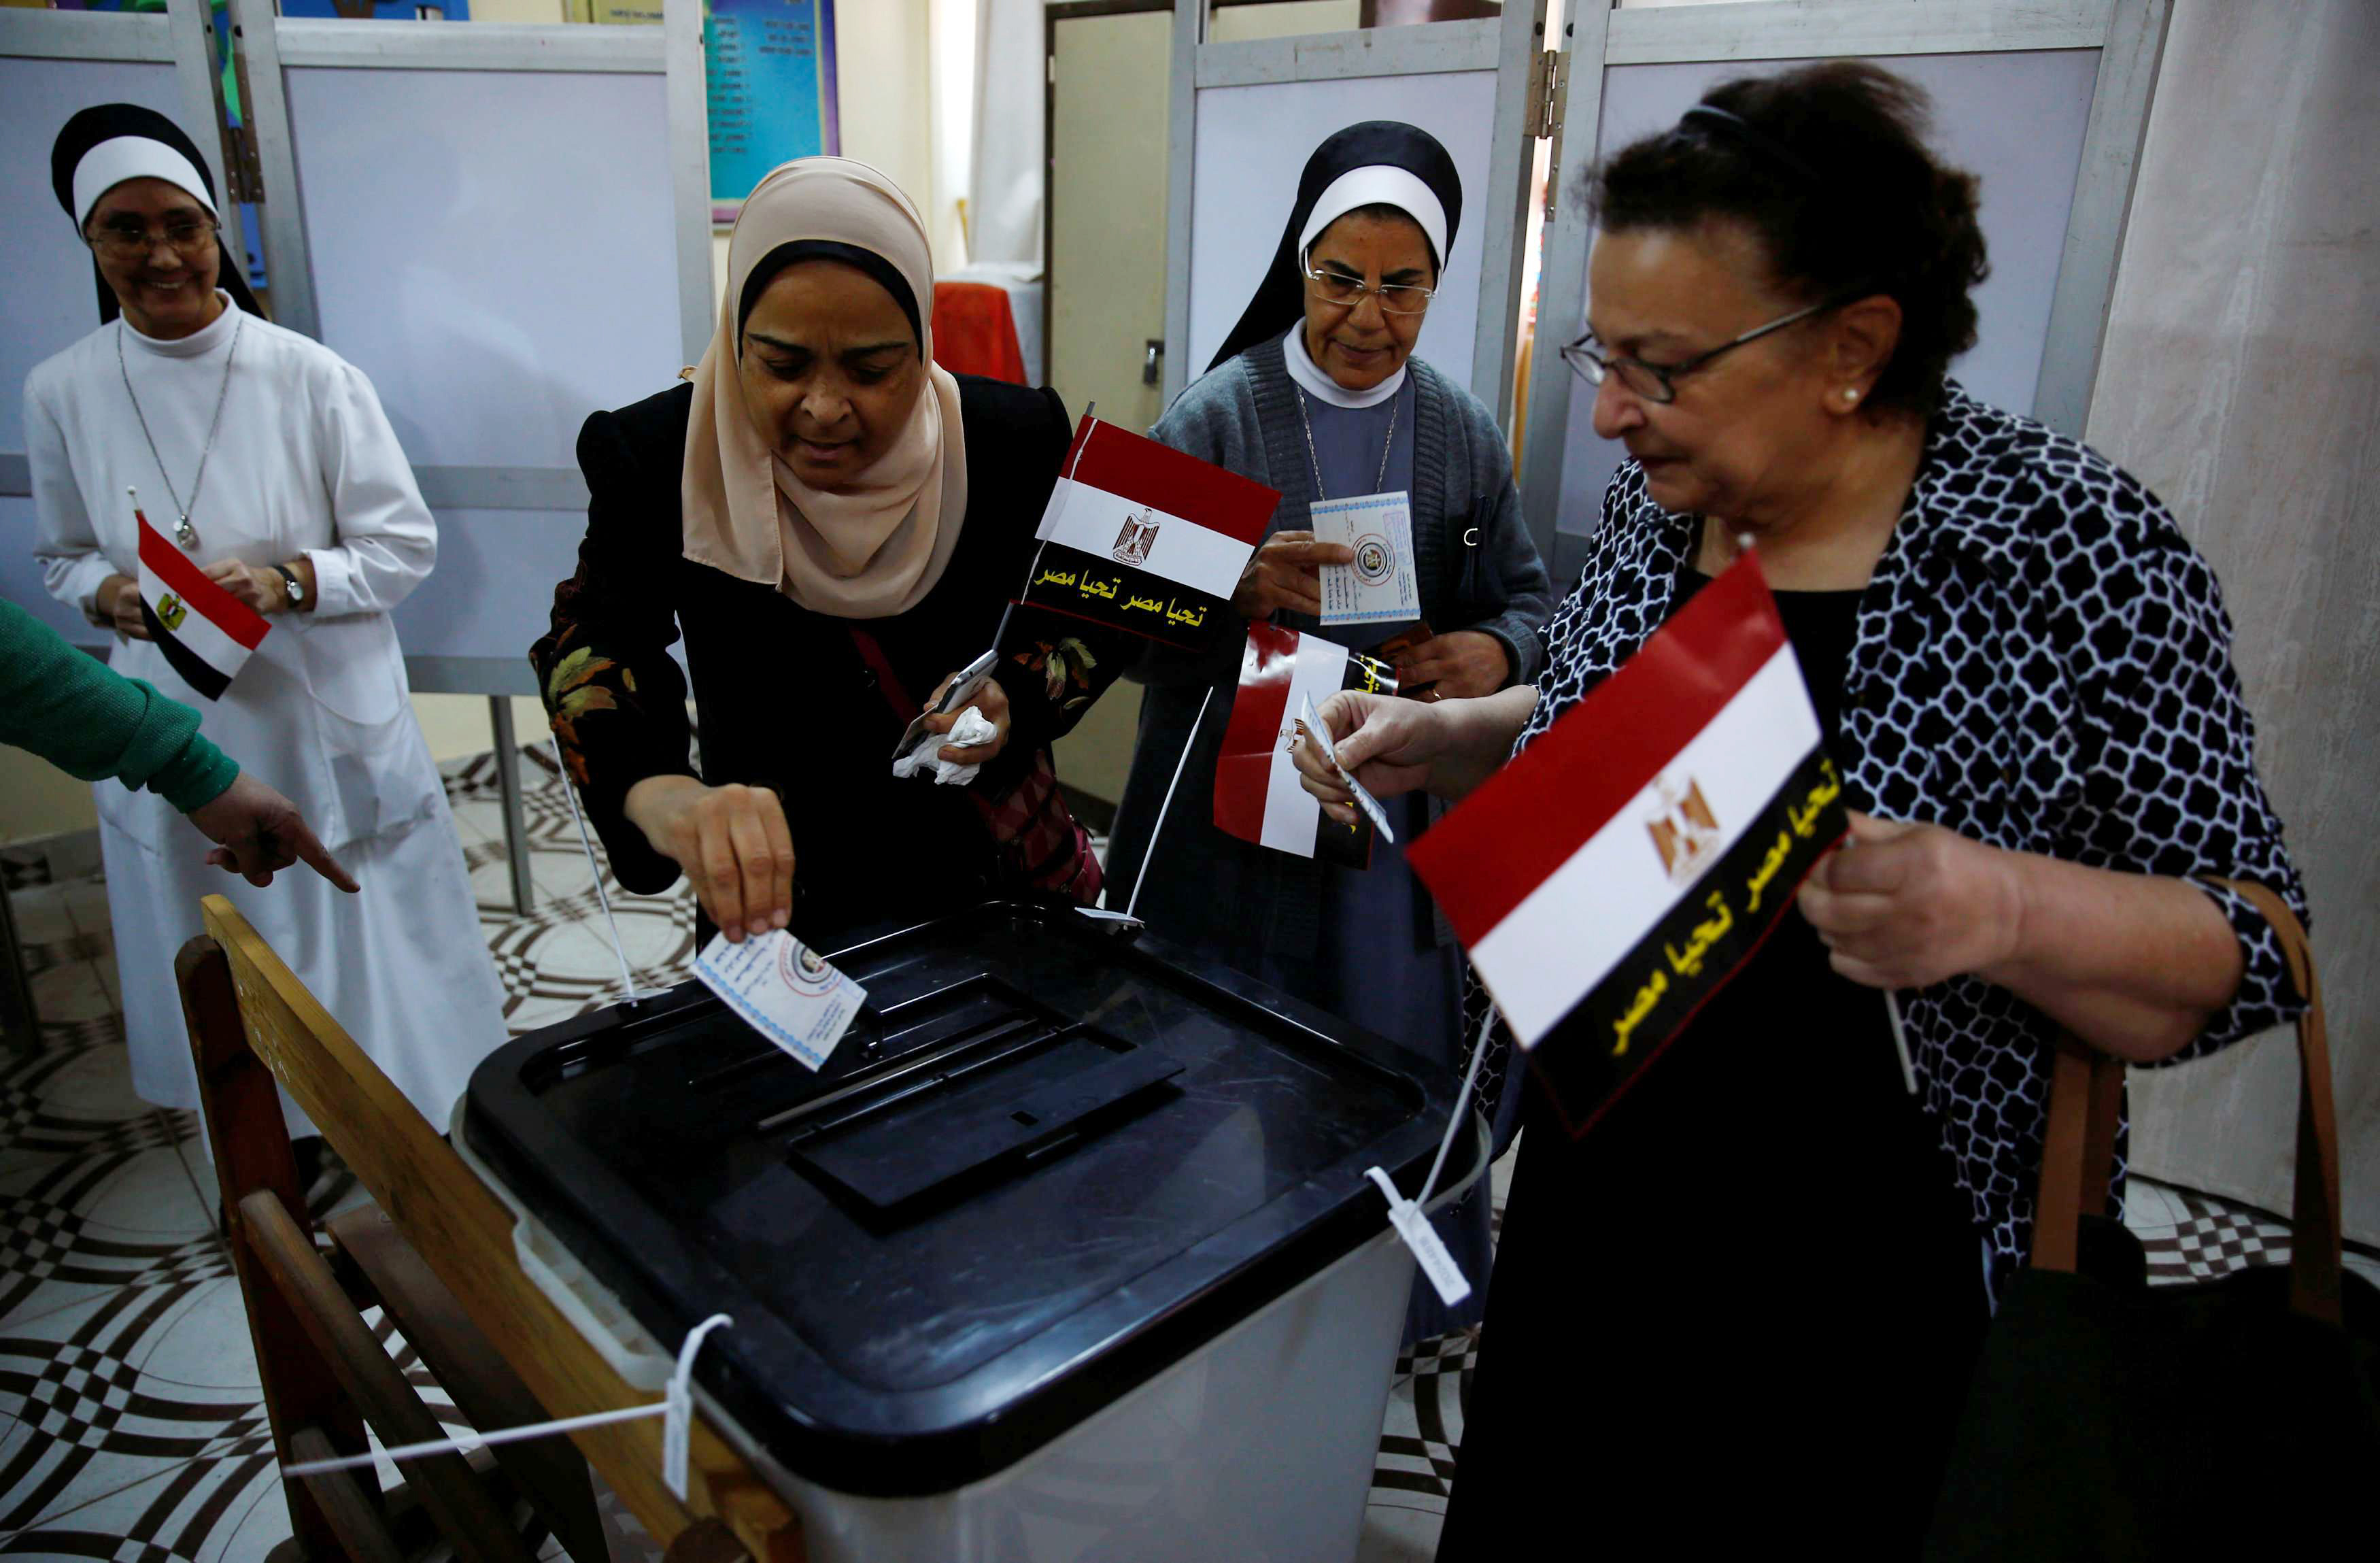 Egyptian elections begin amid intensive security measures